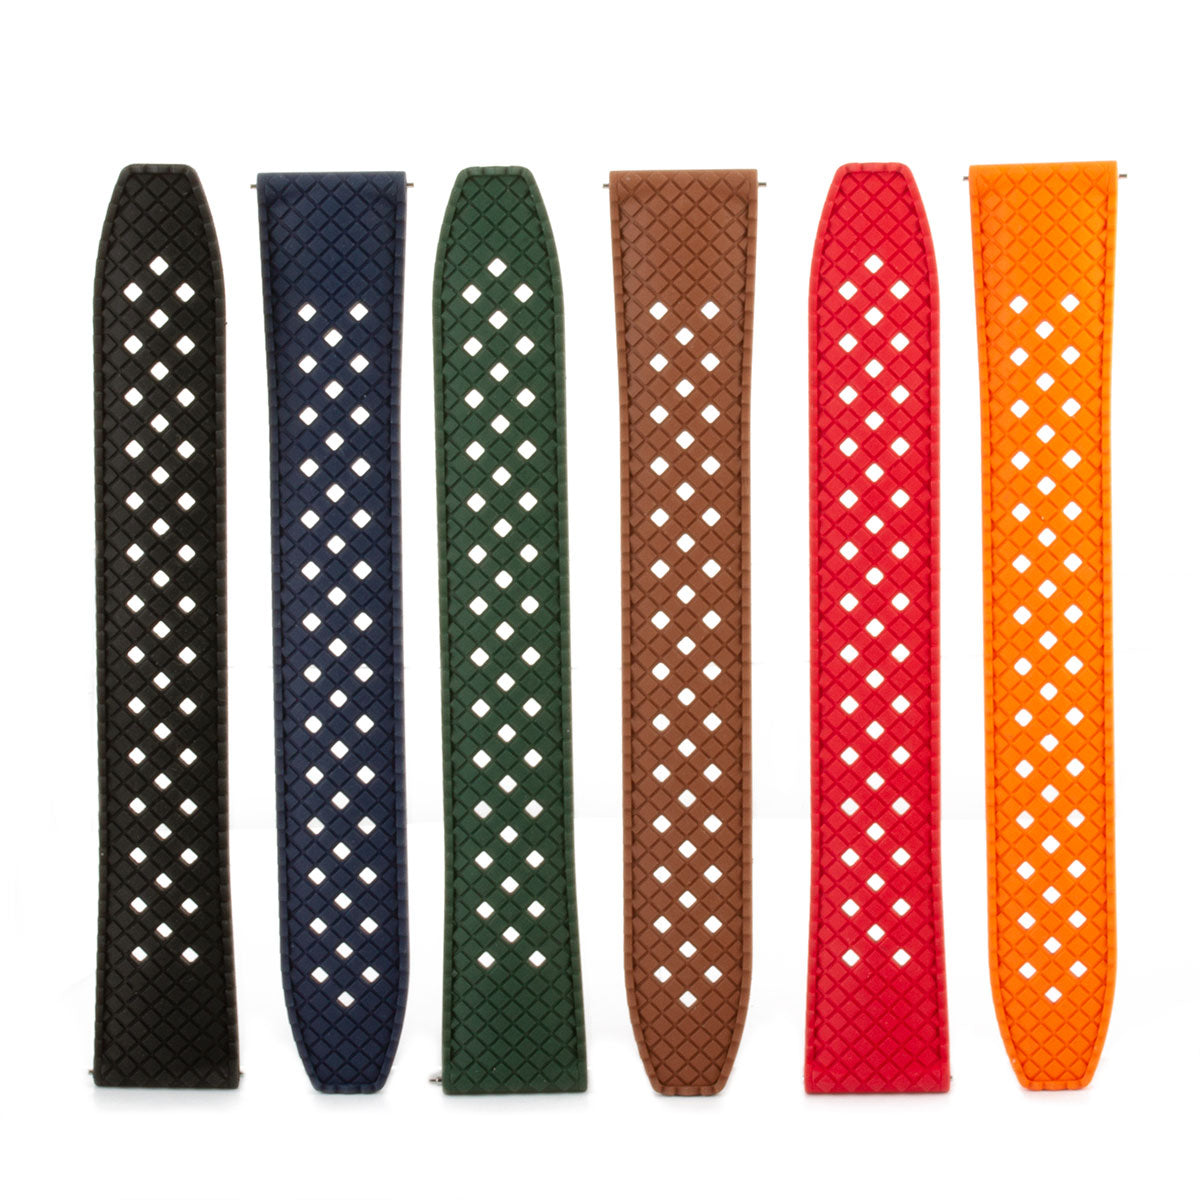 "Driver" Capsule Tropic watch band - Rubber (black, brown, green, red...)